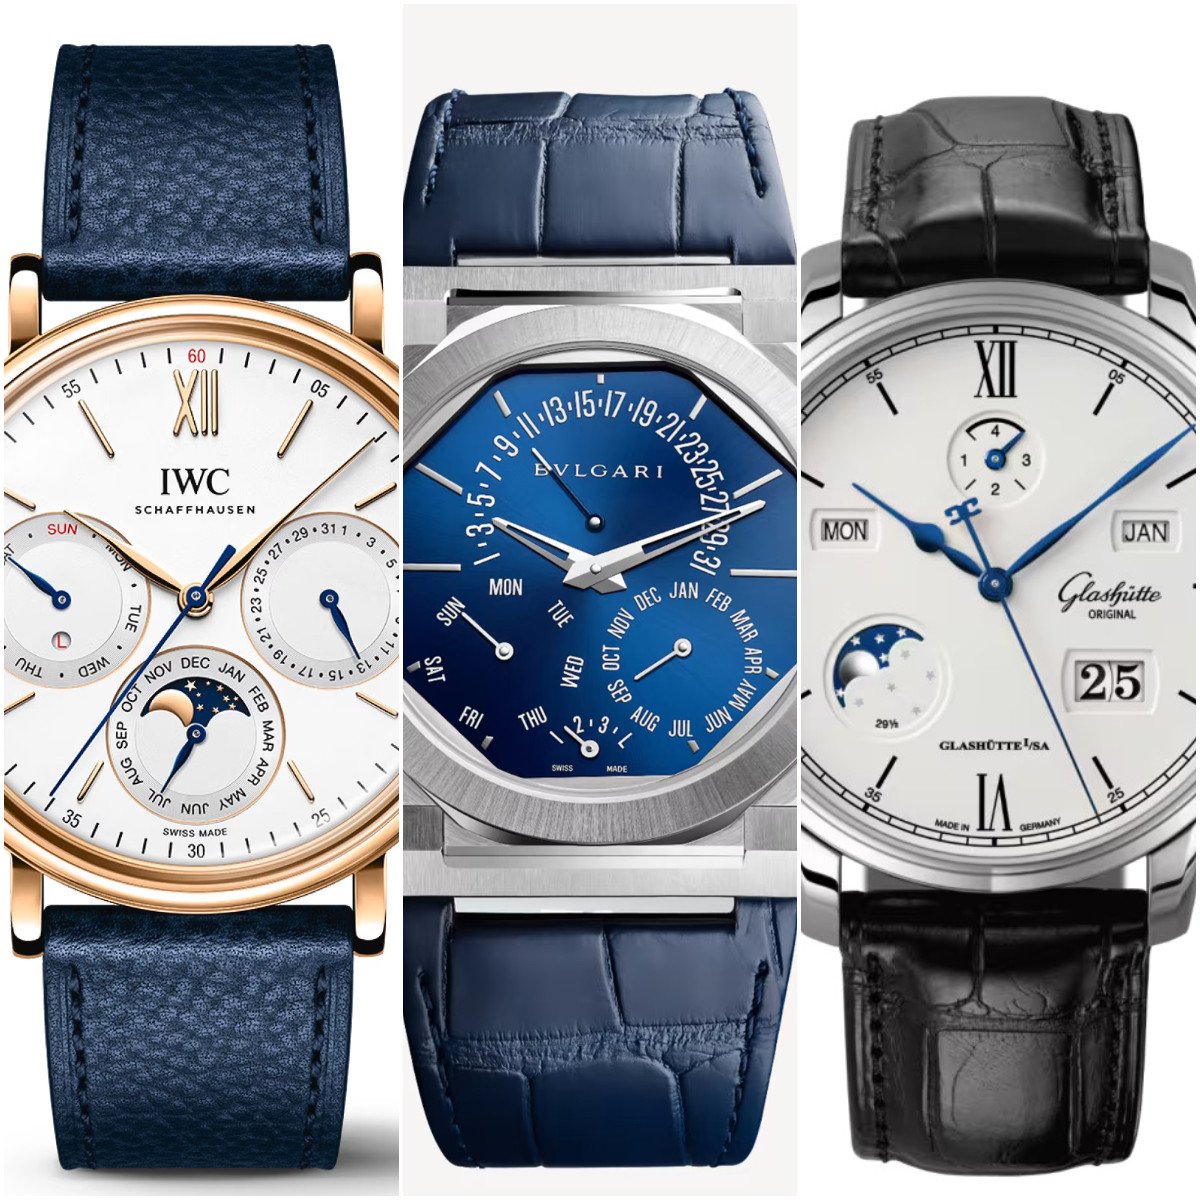 Five perpetual calendar timepieces as we welcome the extra day of the leap year on February 29, from the likes of IWC, Bulgari and Glashütte. Photos: Handout